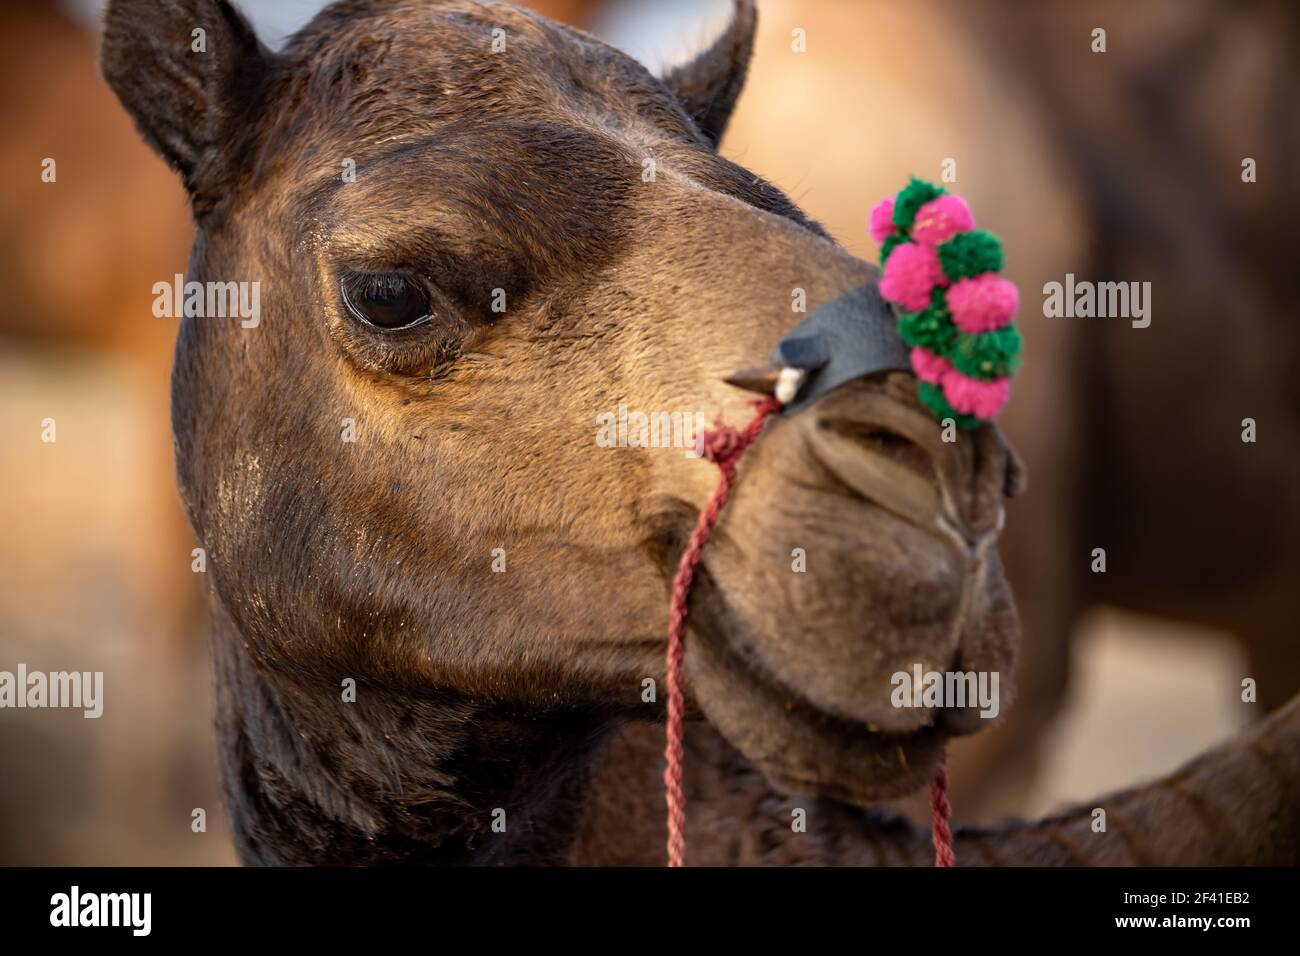 Camels at the Pushkar Fair, also called the Pushkar Camel Fair or locally as Kartik Mela is an annual multi-day livestock fair and cultural held in the town of Pushkar Rajasthan, India. Stock Photo